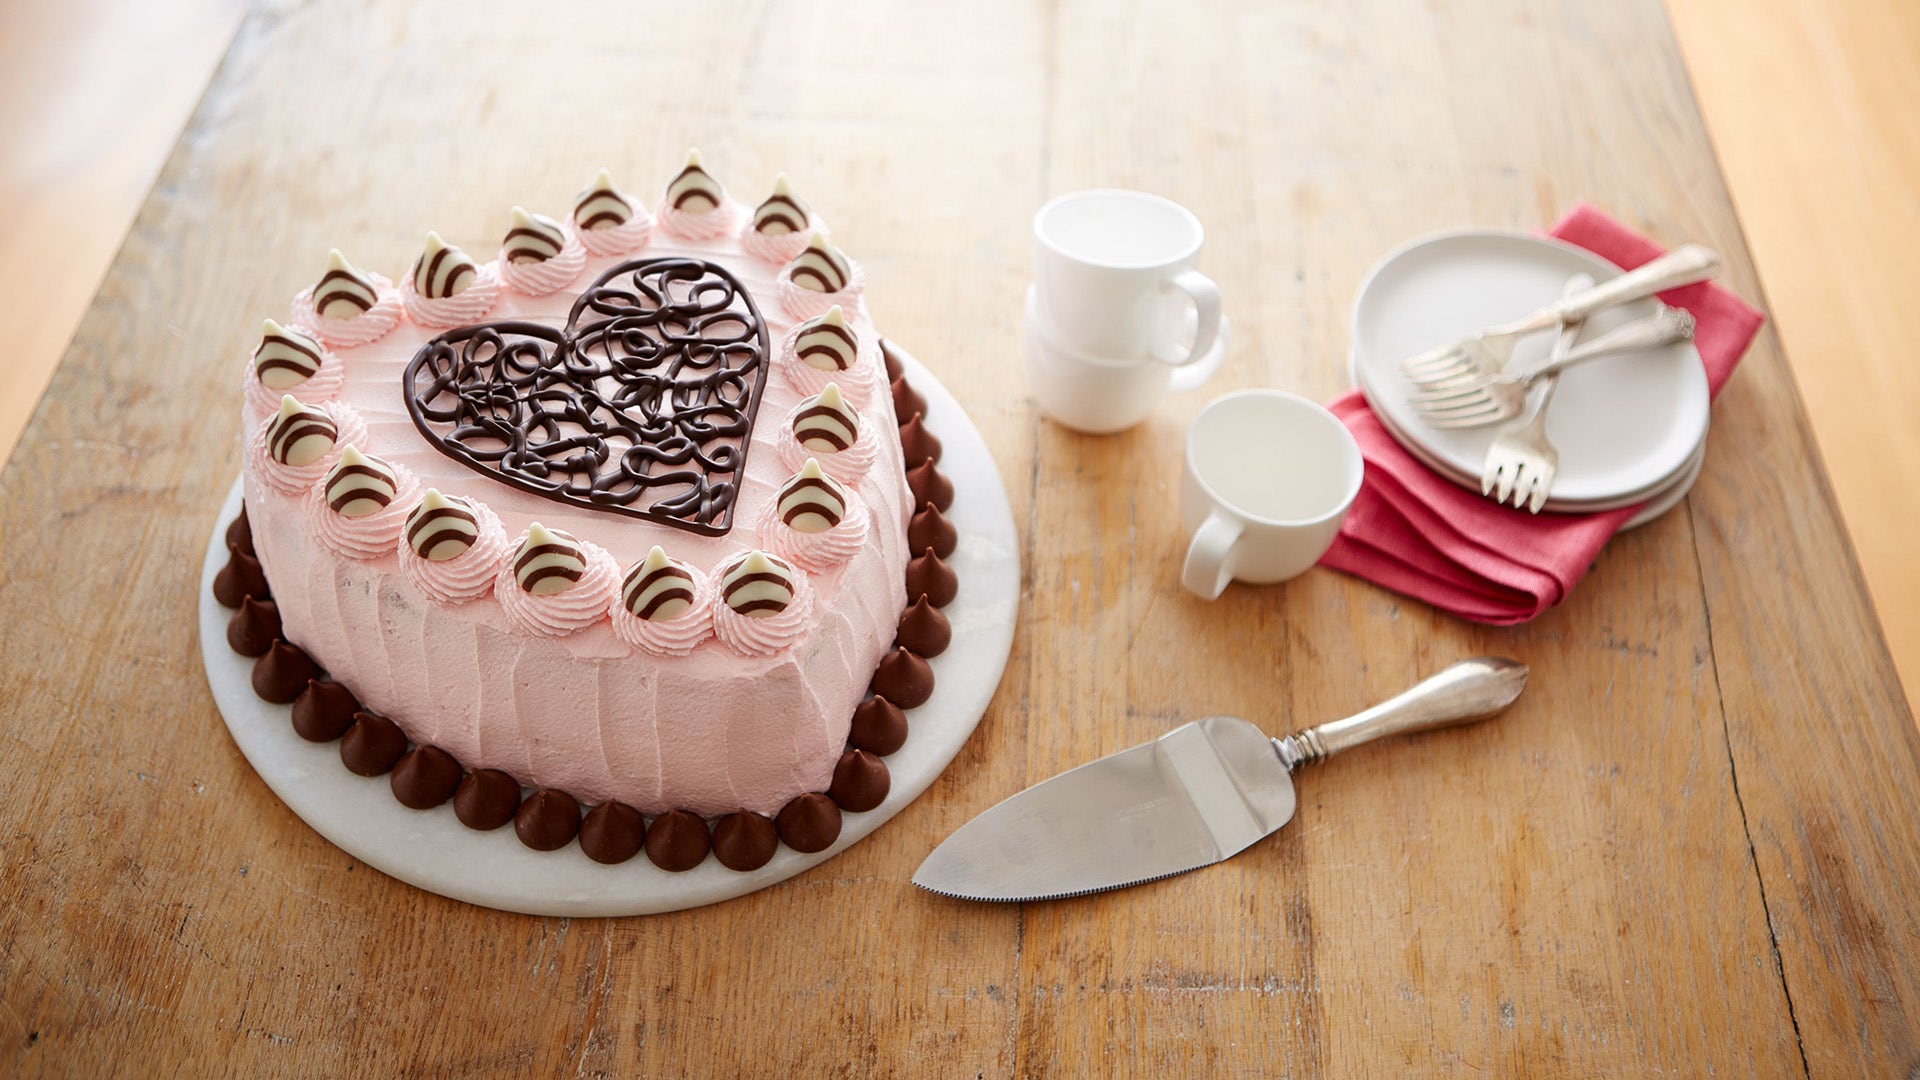 Valentine's Day Cakes Online, Free Delivery - Cake Plaza